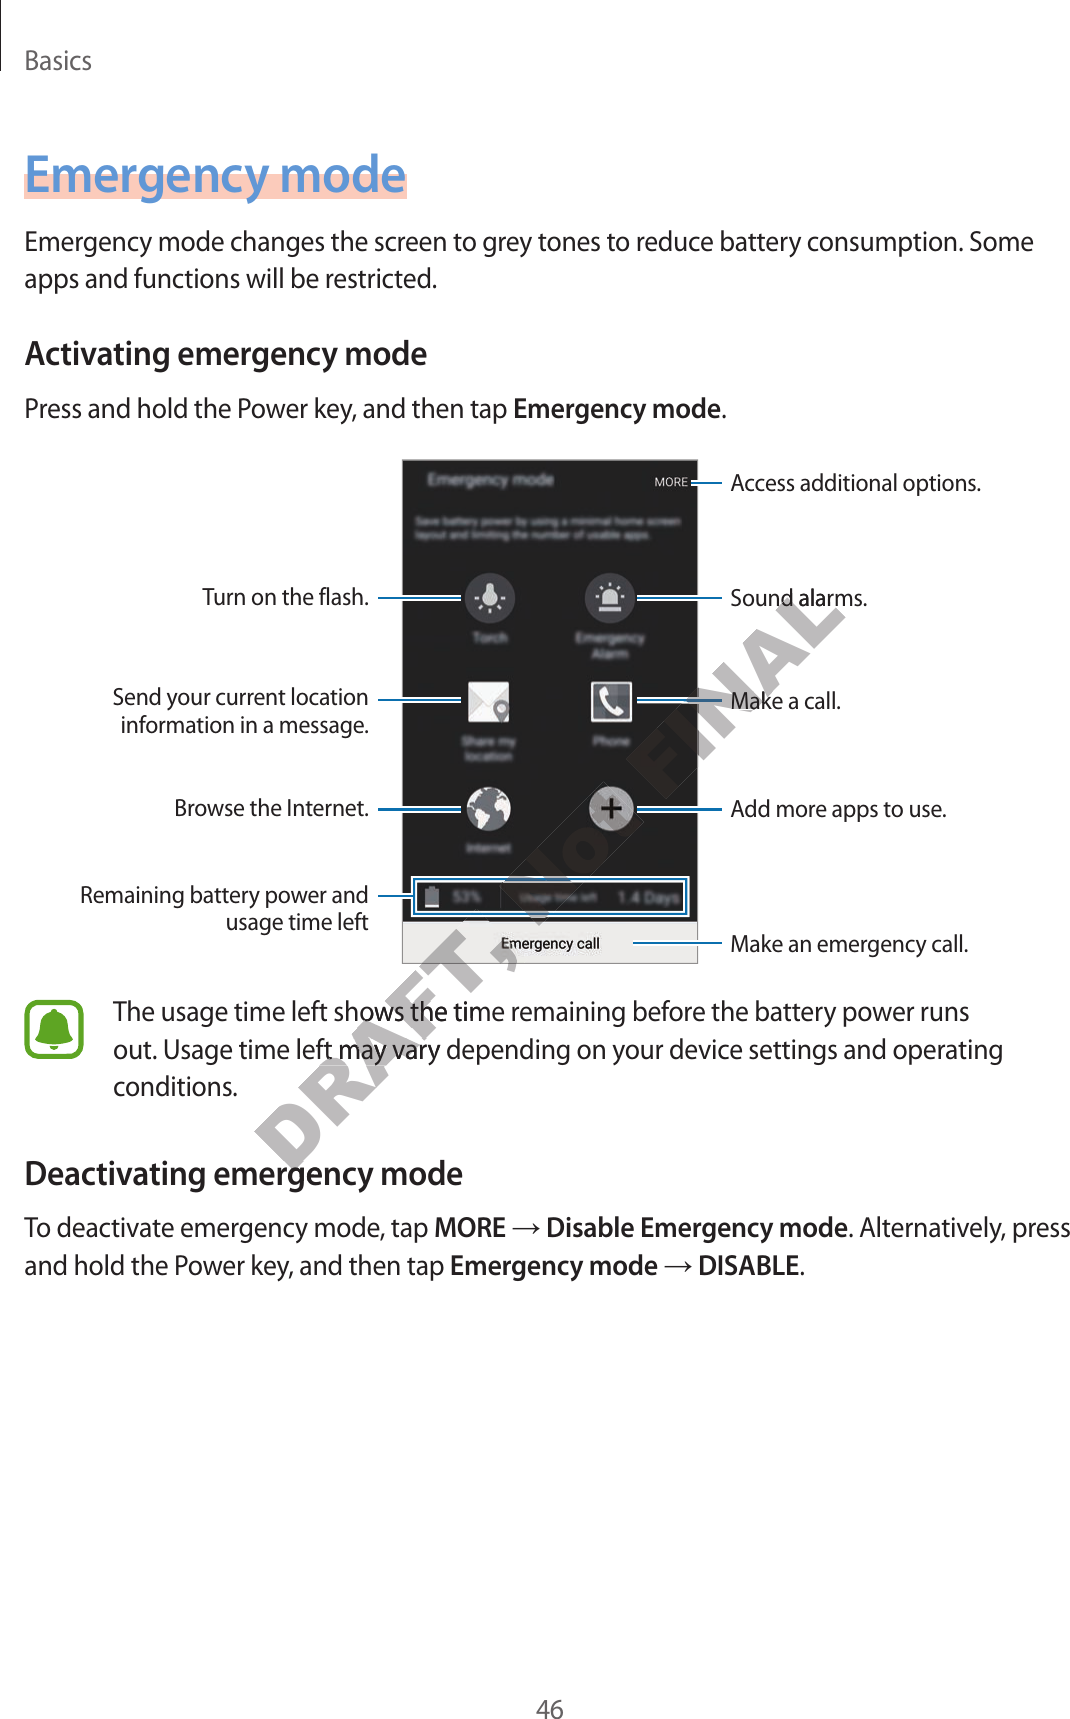 Basics46Emergency modeEmergency mode changes the screen to grey tones to reduce battery consumption. Some apps and functions will be restricted.Activating emergency modePress and hold the Power key, and then tap Emergency mode.Add more apps to use.Make an emergency call.Remaining battery power and usage time leftTurn on the flash.Make a call.Send your current location information in a message.Browse the Internet.Access additional options.Sound alarms.The usage time left shows the time remaining before the battery power runs out. Usage time left may vary depending on your device settings and operating conditions.Deactivating emergency modeTo deactivate emergency mode, tap MORE  Disable Emergency mode. Alternatively, press and hold the Power key, and then tap Emergency mode  DISABLE.DRAFT, DRAFT, DRAFT, DRAFT, DRAFT, t shows the time rt shows the time rsage time left may vary depending on ysage time left may vary depending on yting emergencting emergencNot Not FINALFINALFINALFINALMake a callMake a callound alarmsound alar